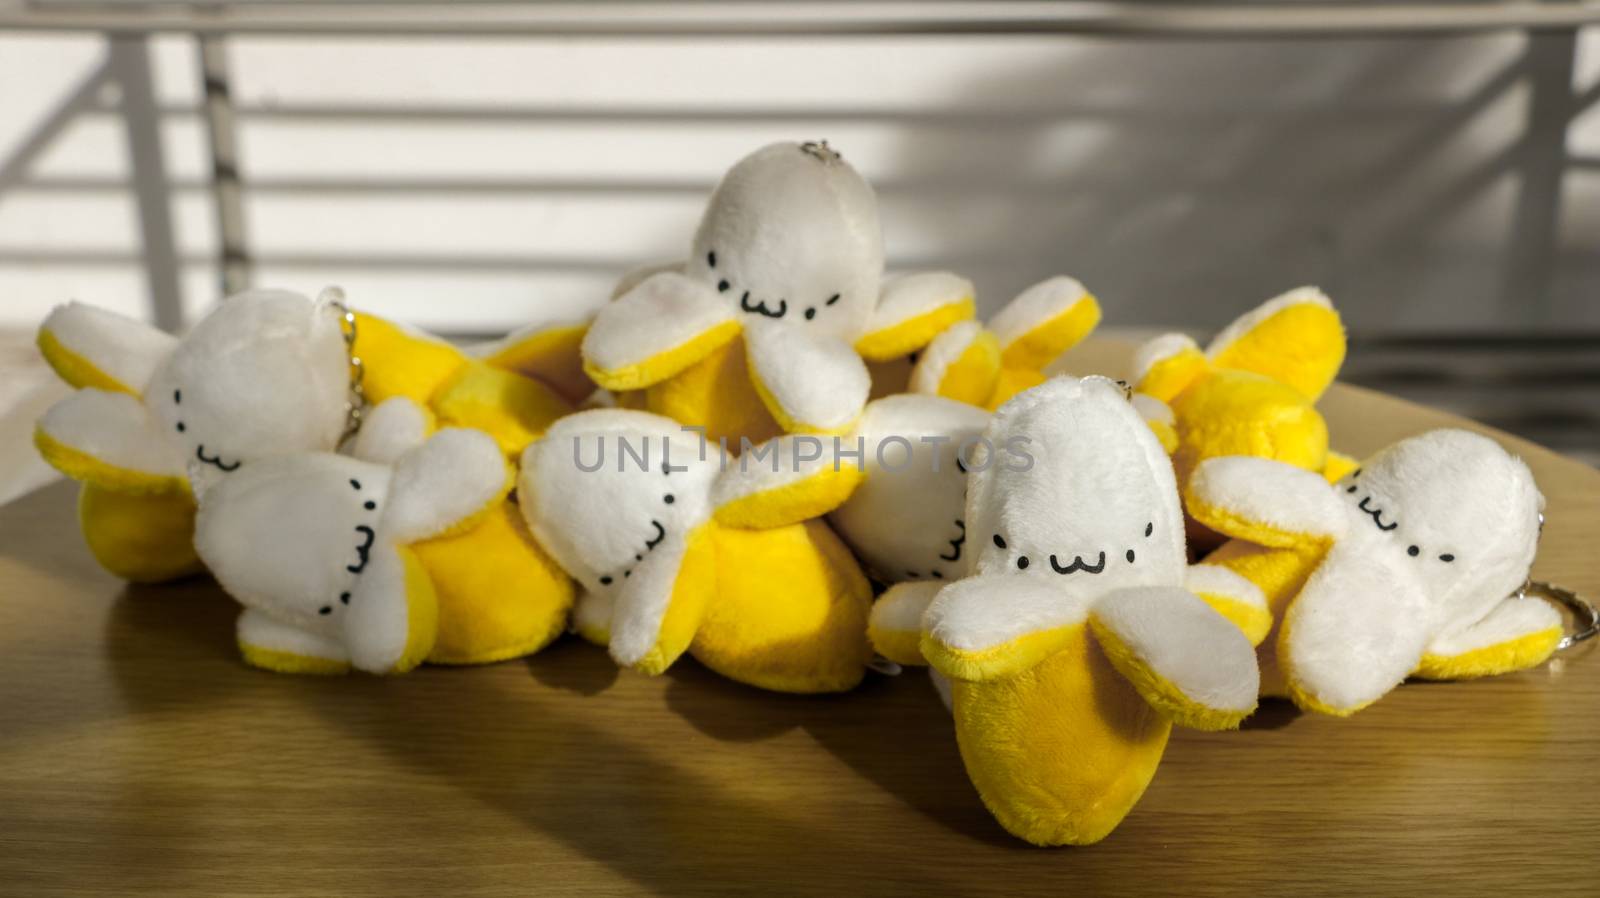 Miniature Stuffed Bananas/ Keychain/ Soft Toys with Cute Faces on Wooden Table in the Sun - Outdoors